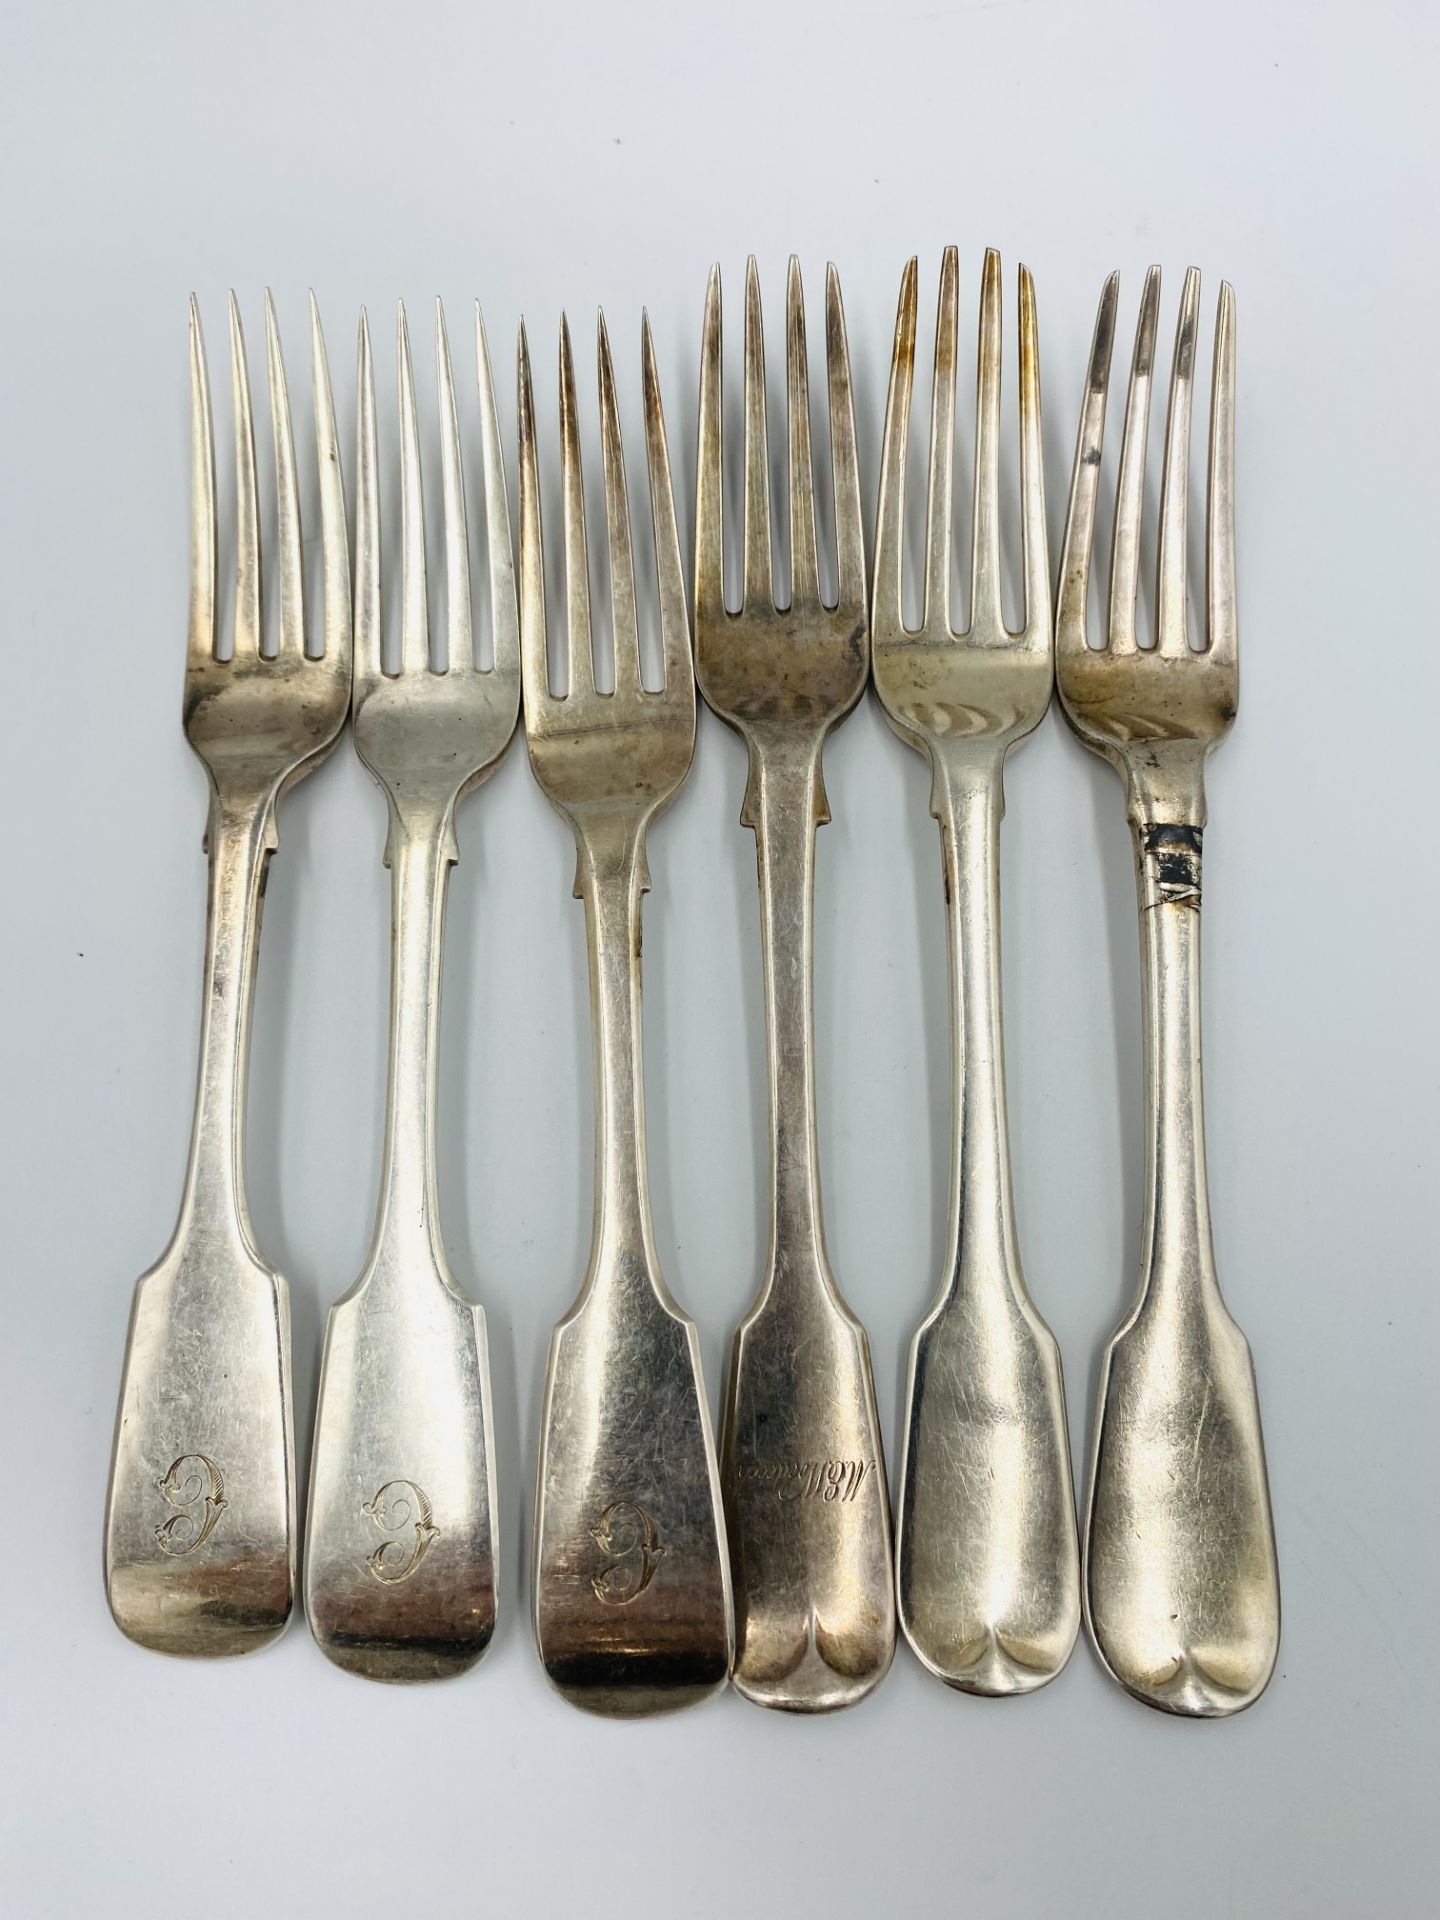 Six silver forks